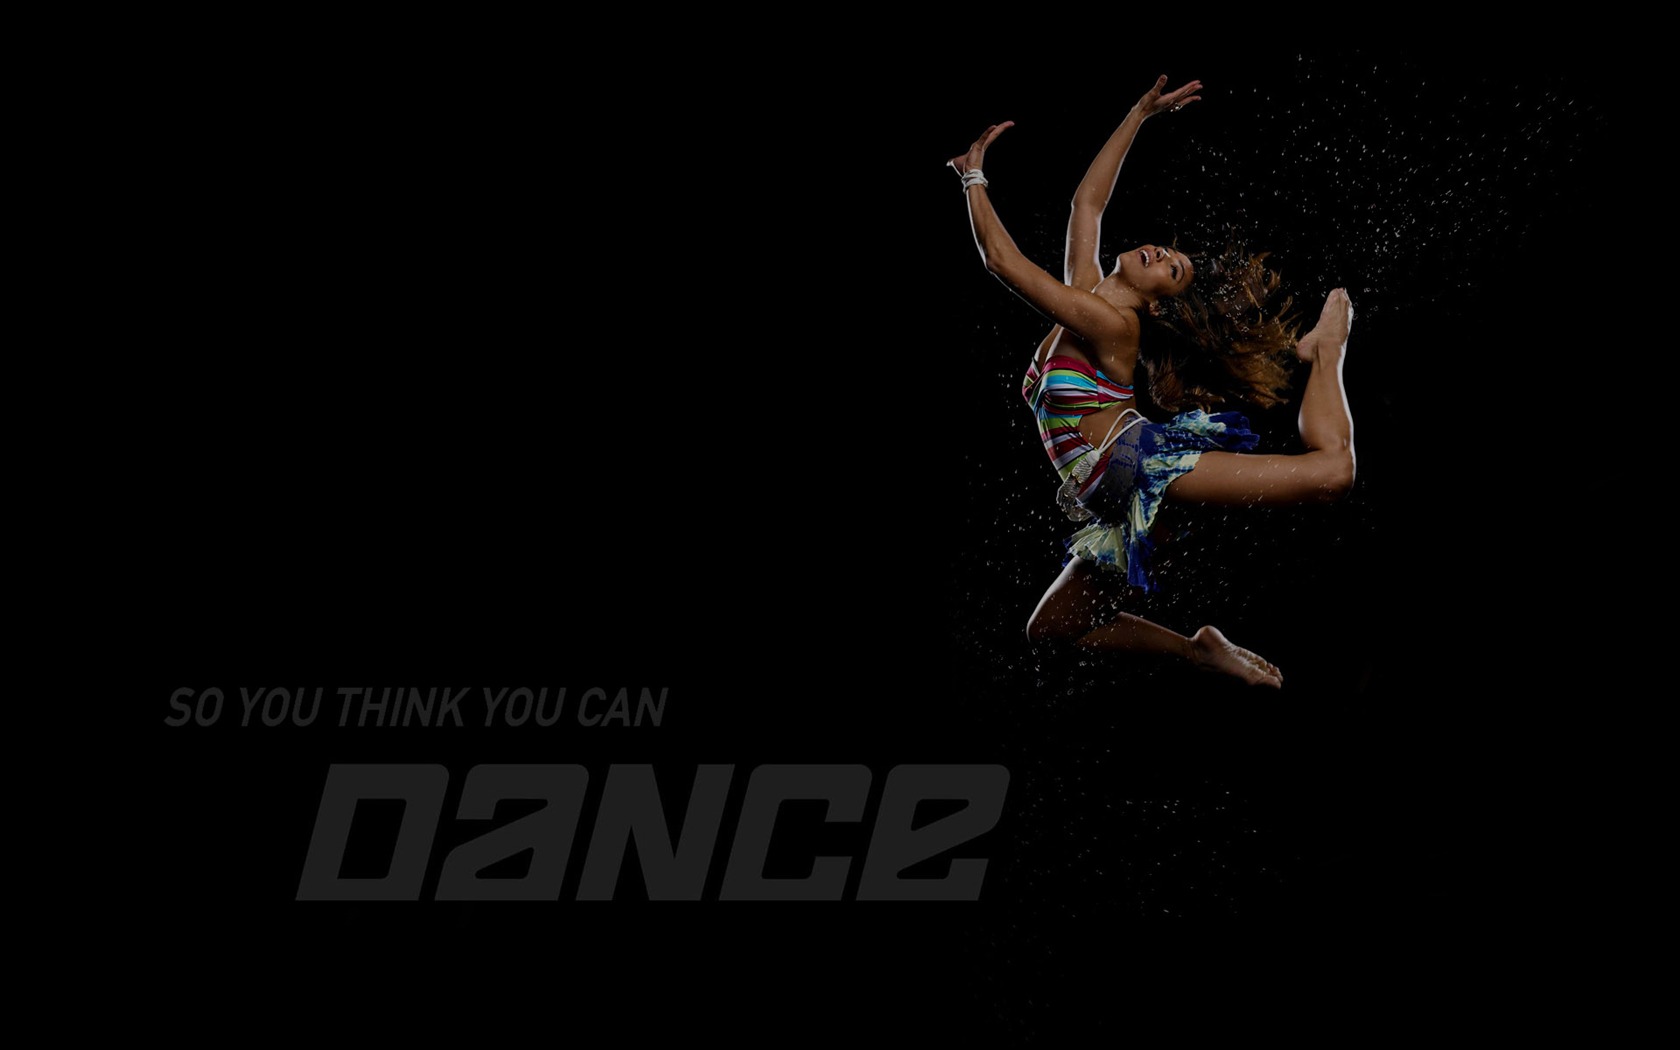 So You Think You Can Dance 舞林爭霸壁紙(二) #17 - 1680x1050